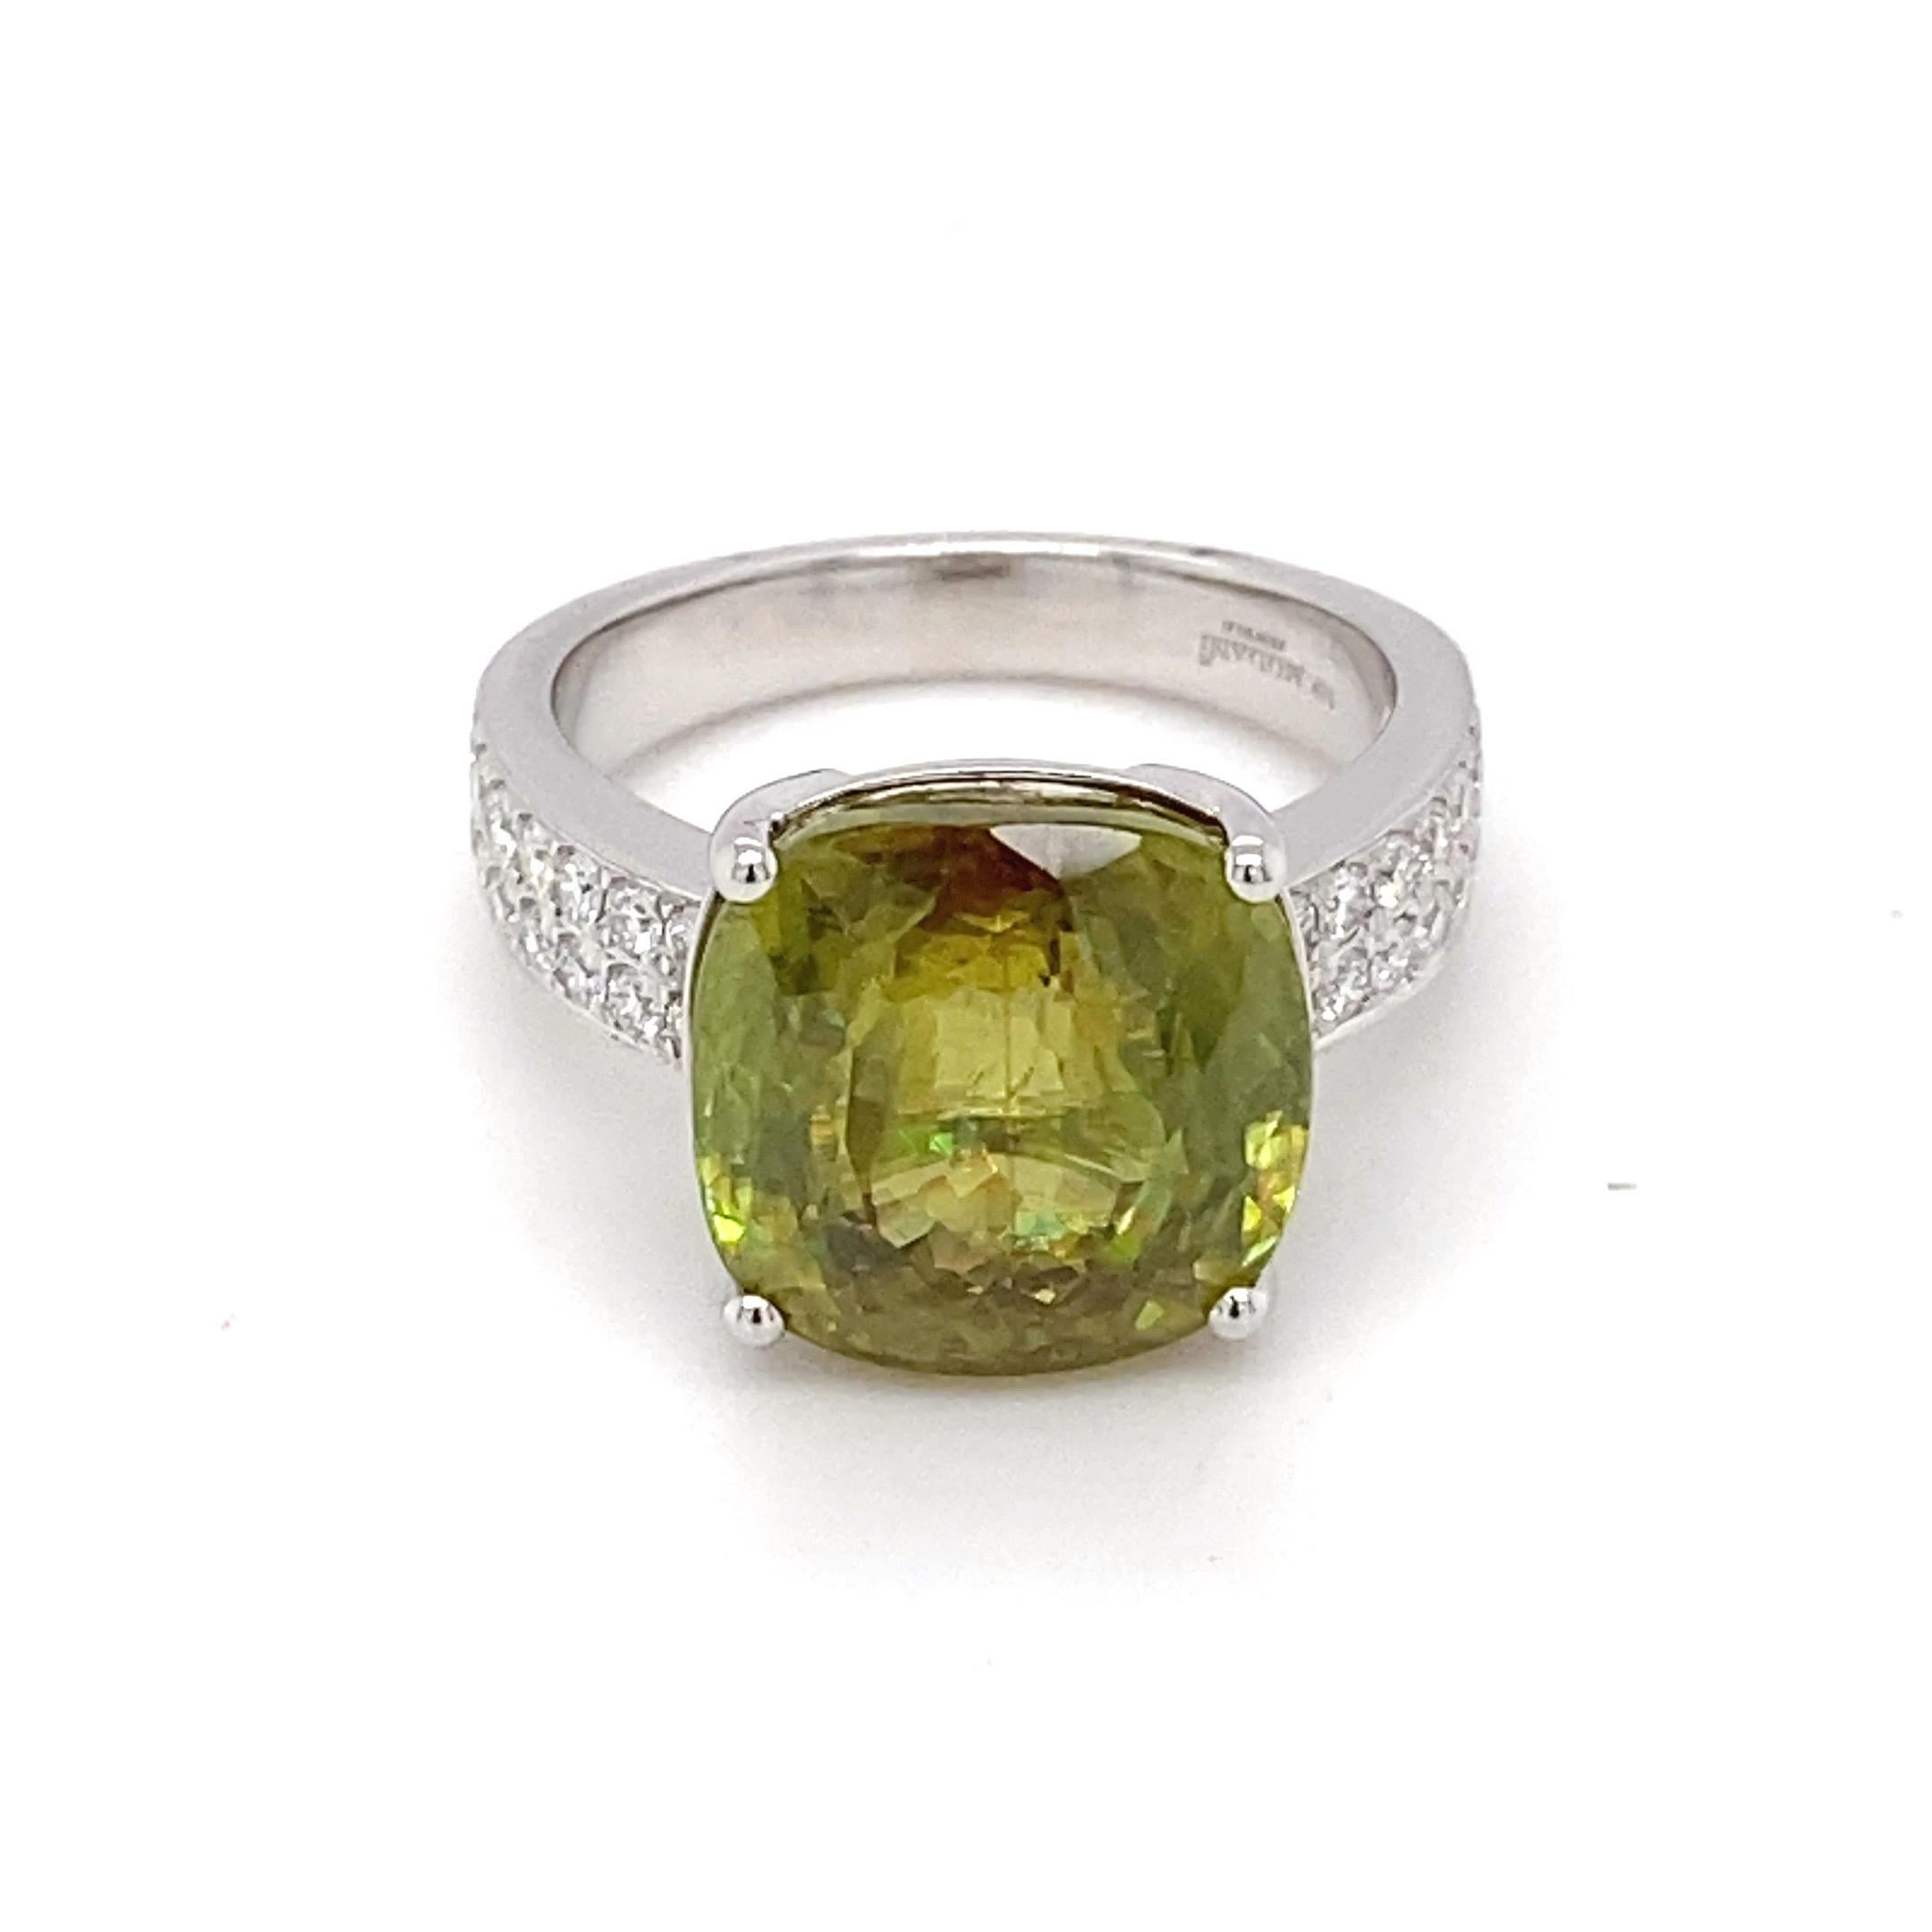 This 10.59 Carat cushion cut Sphene is set in white gold with four prongs and has accent diamond on the band. This ring is a minimalist elegance and ideal for daily wear. Sphene has more dispersion than diamond.
Sphene: 10.59 carat
Diamond: 0.51